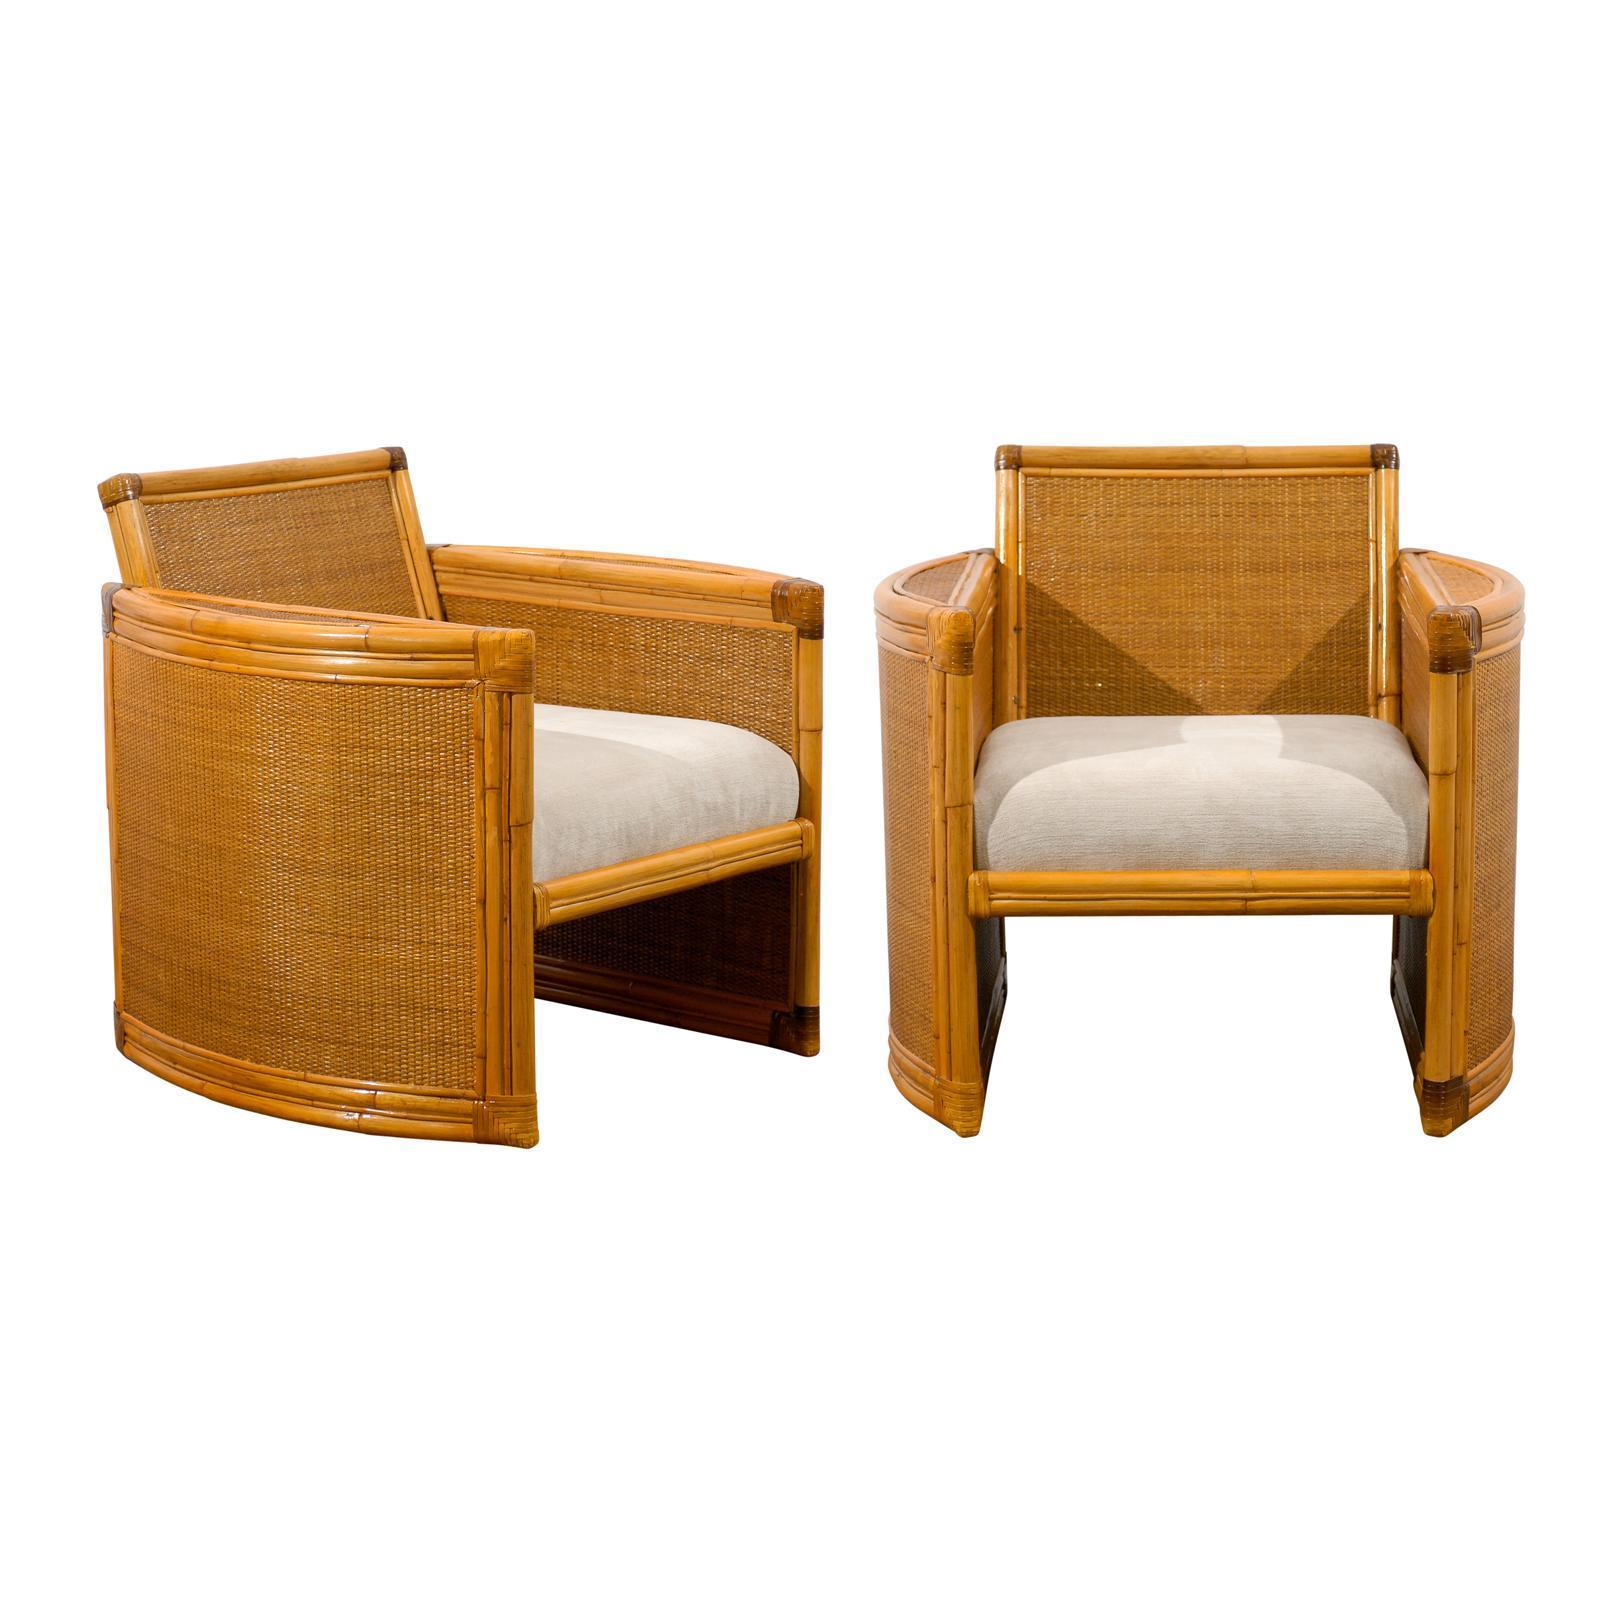 Fabulous Pair of Restored Vintage Rattan and Raffia Club Chairs